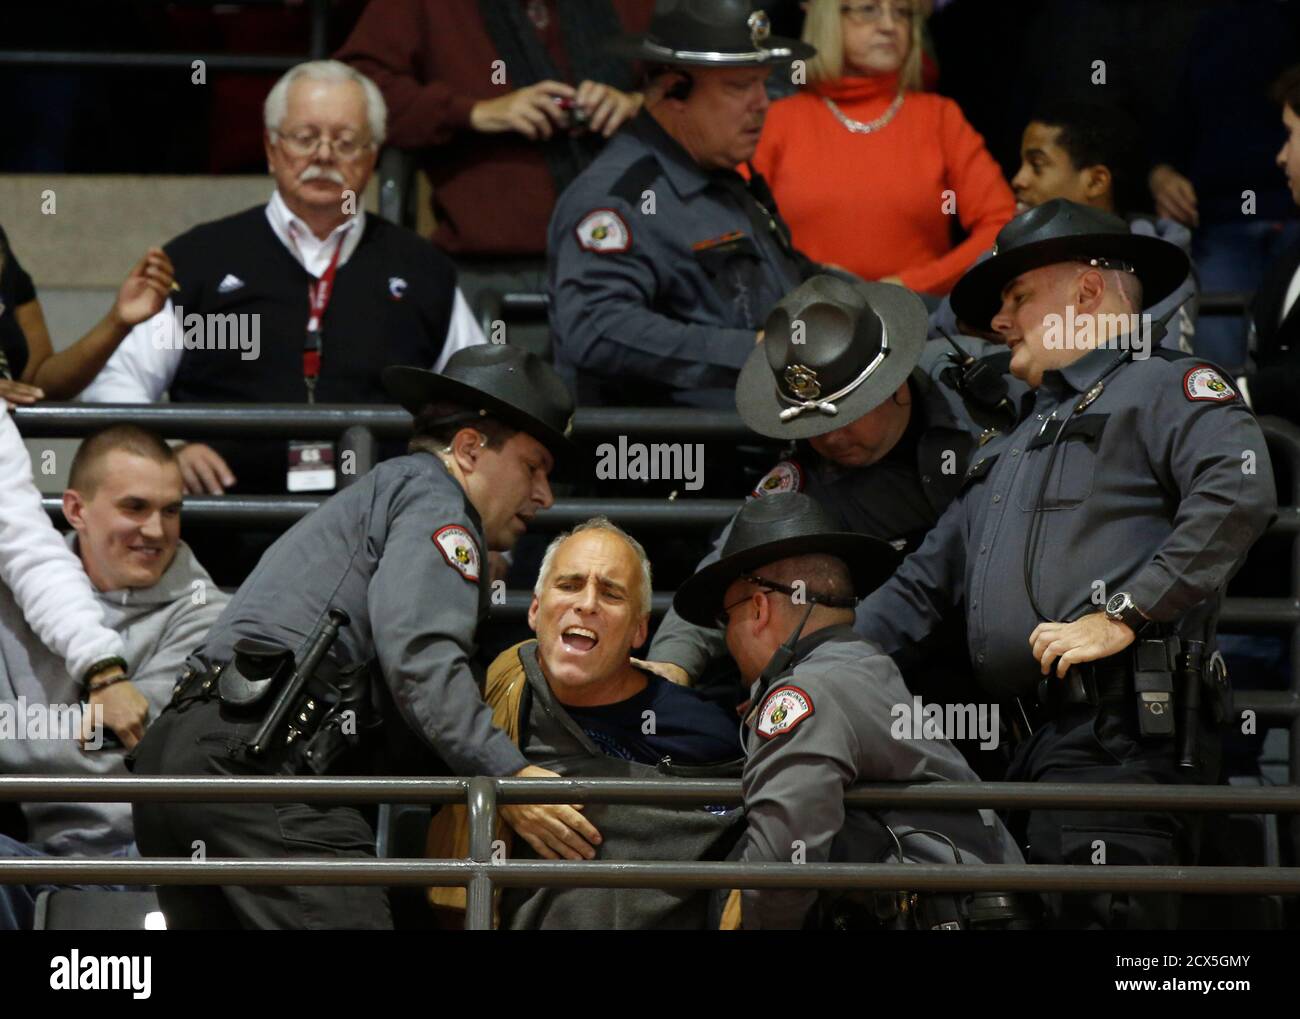 U.S. President Barack Obama is interrupted by an anti-abortion protester as he speaks at a campaign event at Fifth Third Arena at the University of Cincinnati, November 4, 2012. Police carried the man away in handcuffs.         REUTERS/Larry Downing  (UNITED STATES - Tags: POLITICS USA PRESIDENTIAL ELECTION ELECTIONS) Stock Photo